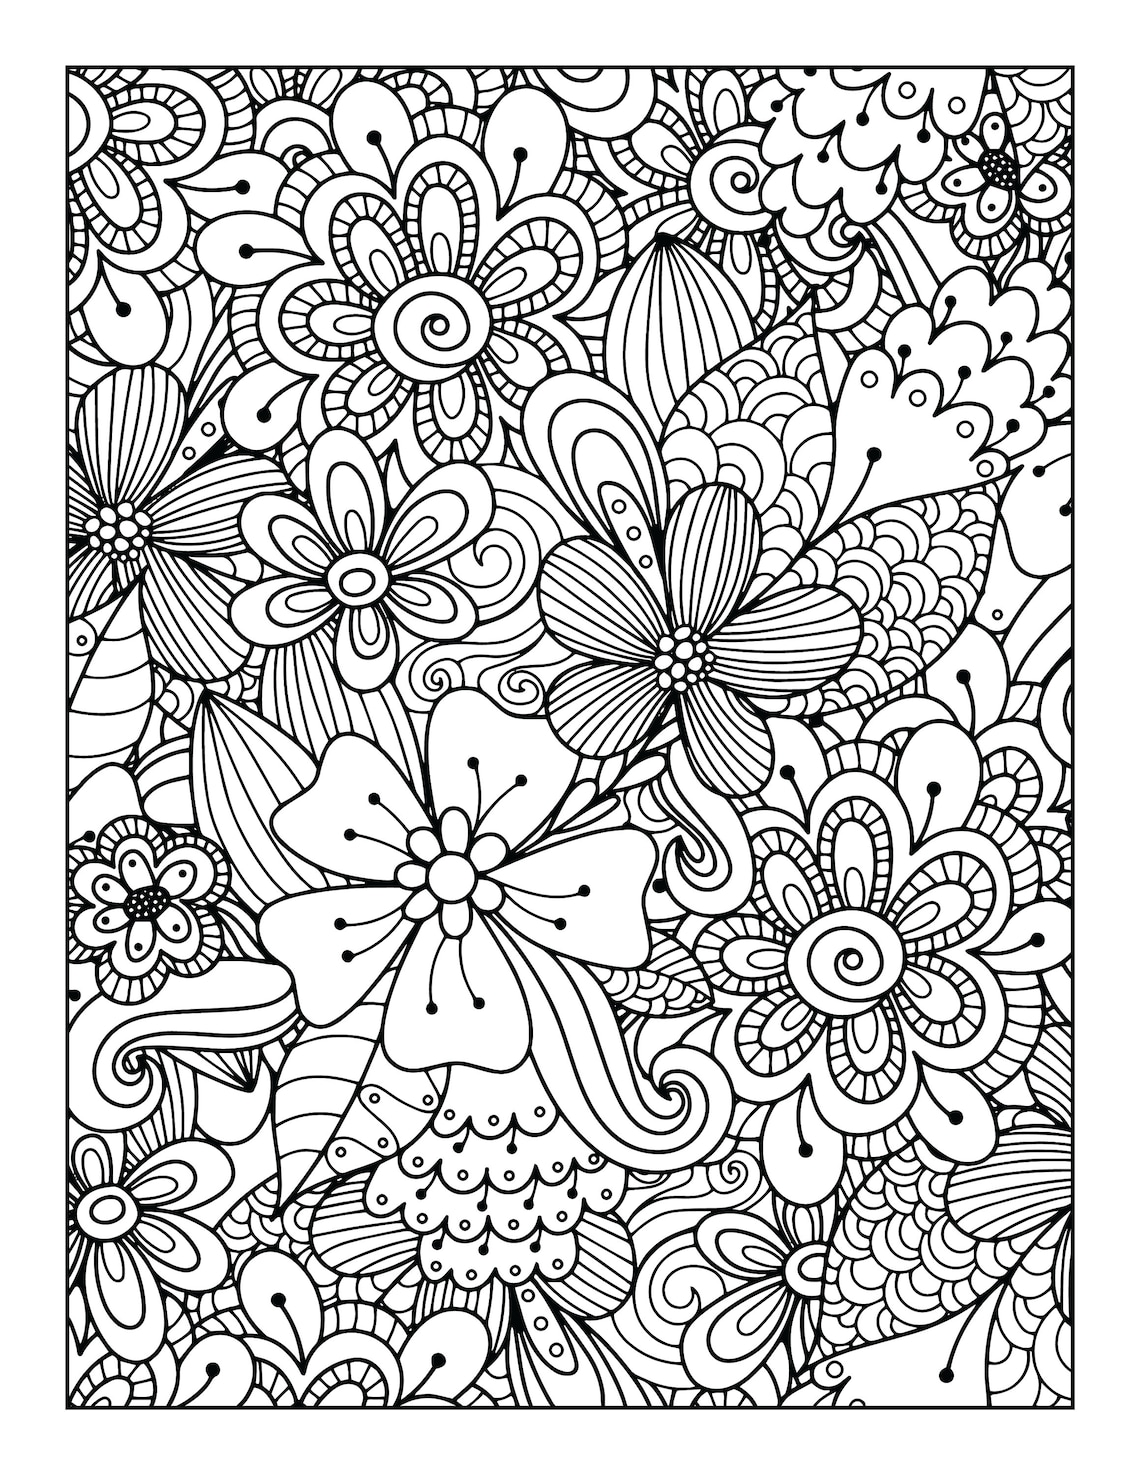 Coloring Book Pages Set One Floral Designs 10 Different - Etsy